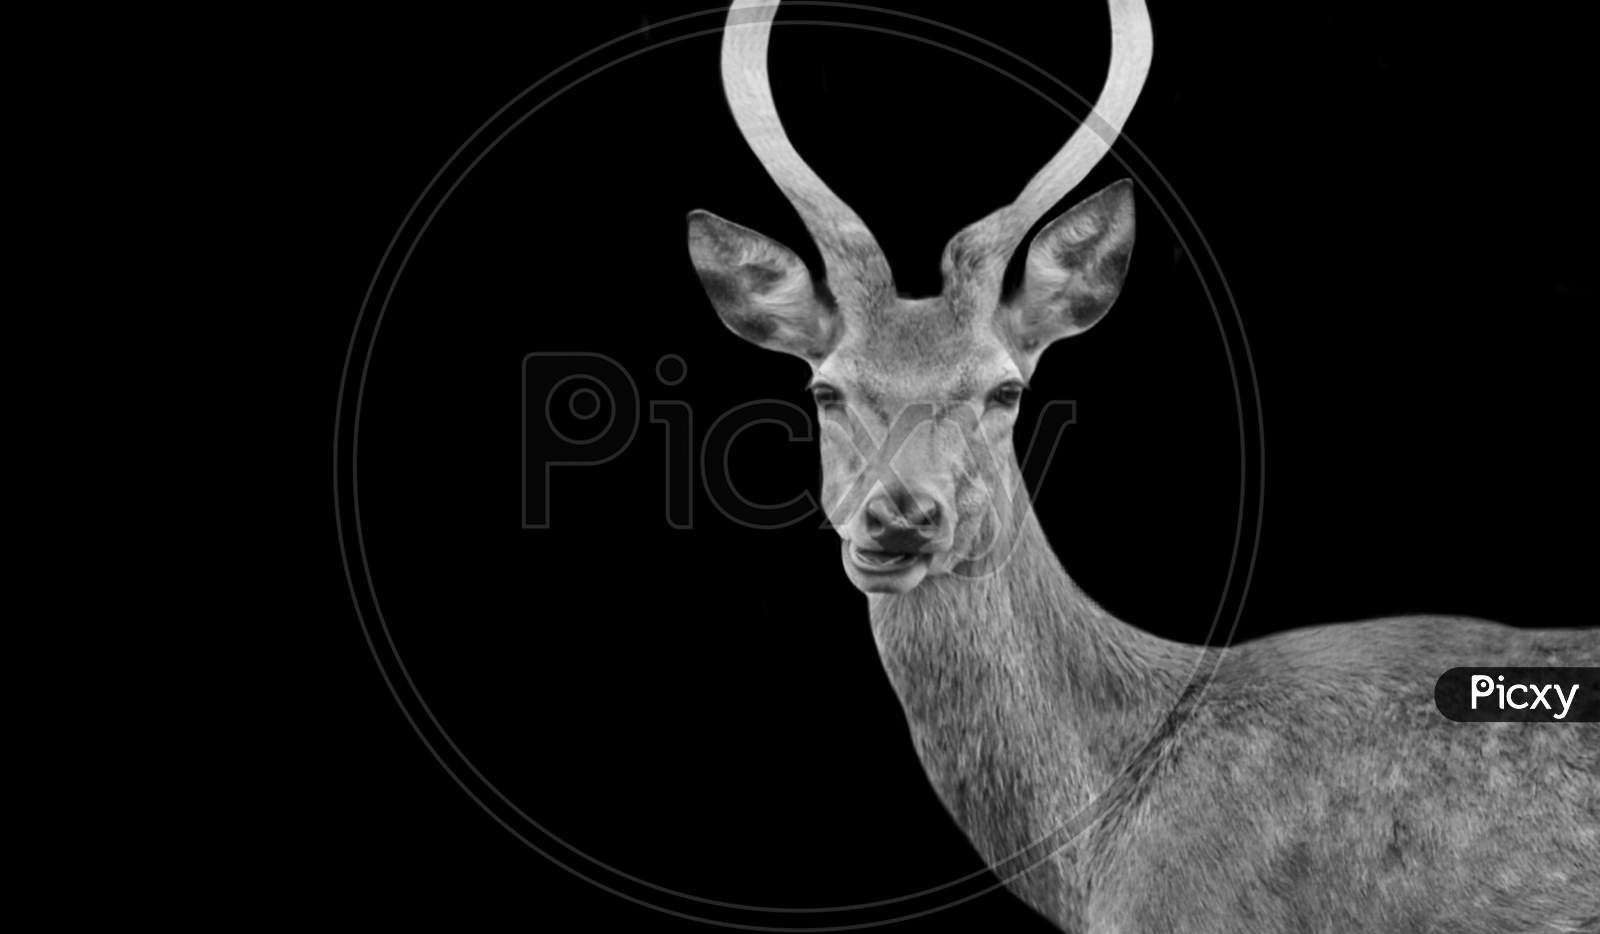 Black And White Roe Deer Portrait In The Black Background